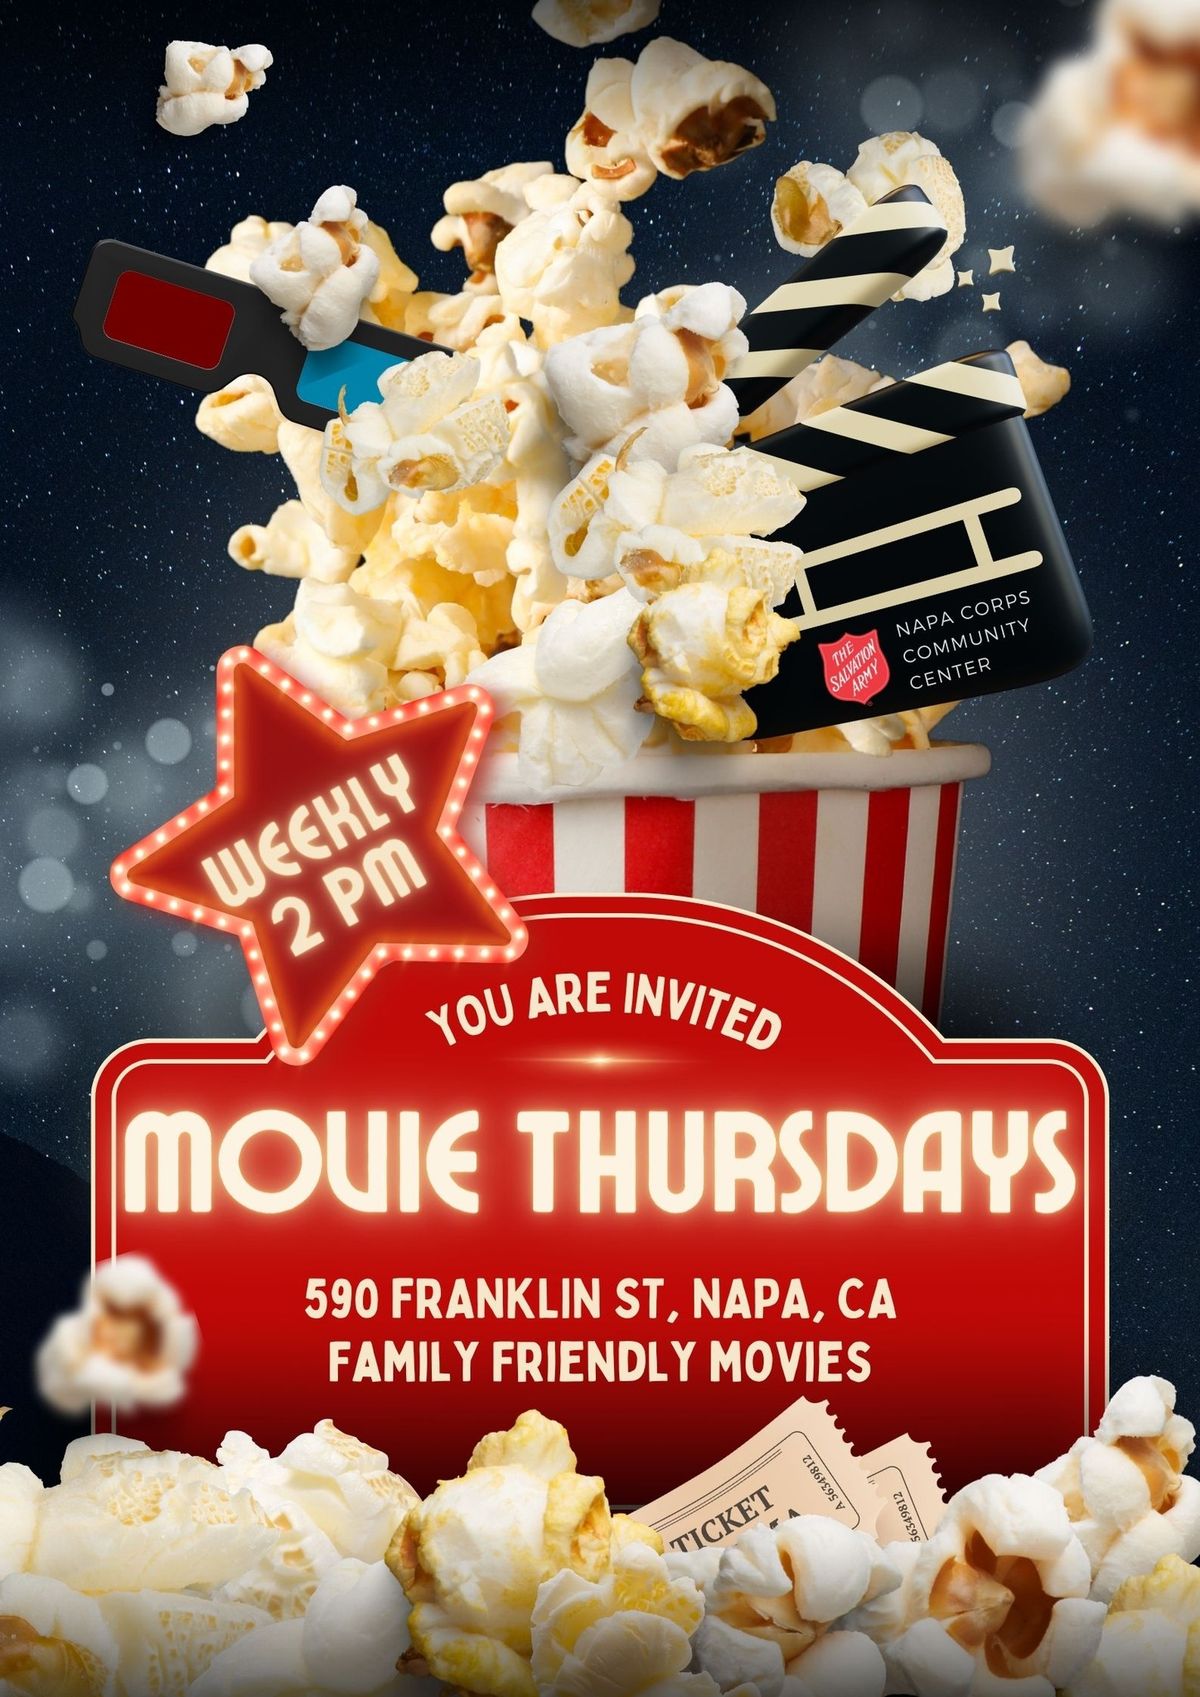 Weekly Family Friendly Movie Showings